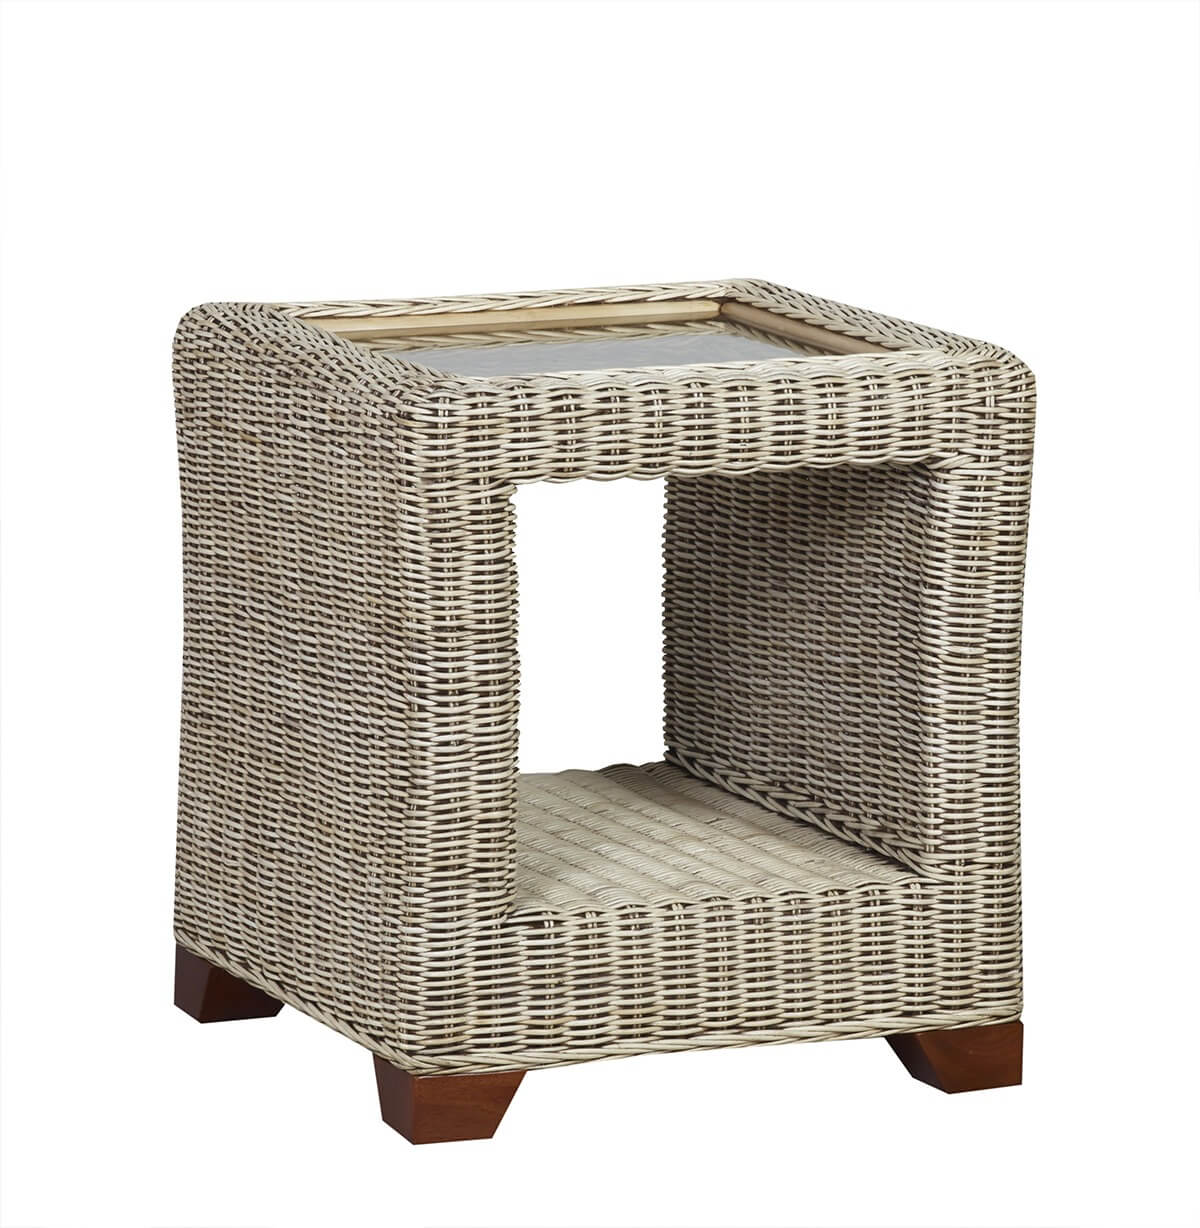 Showing image for Della side table